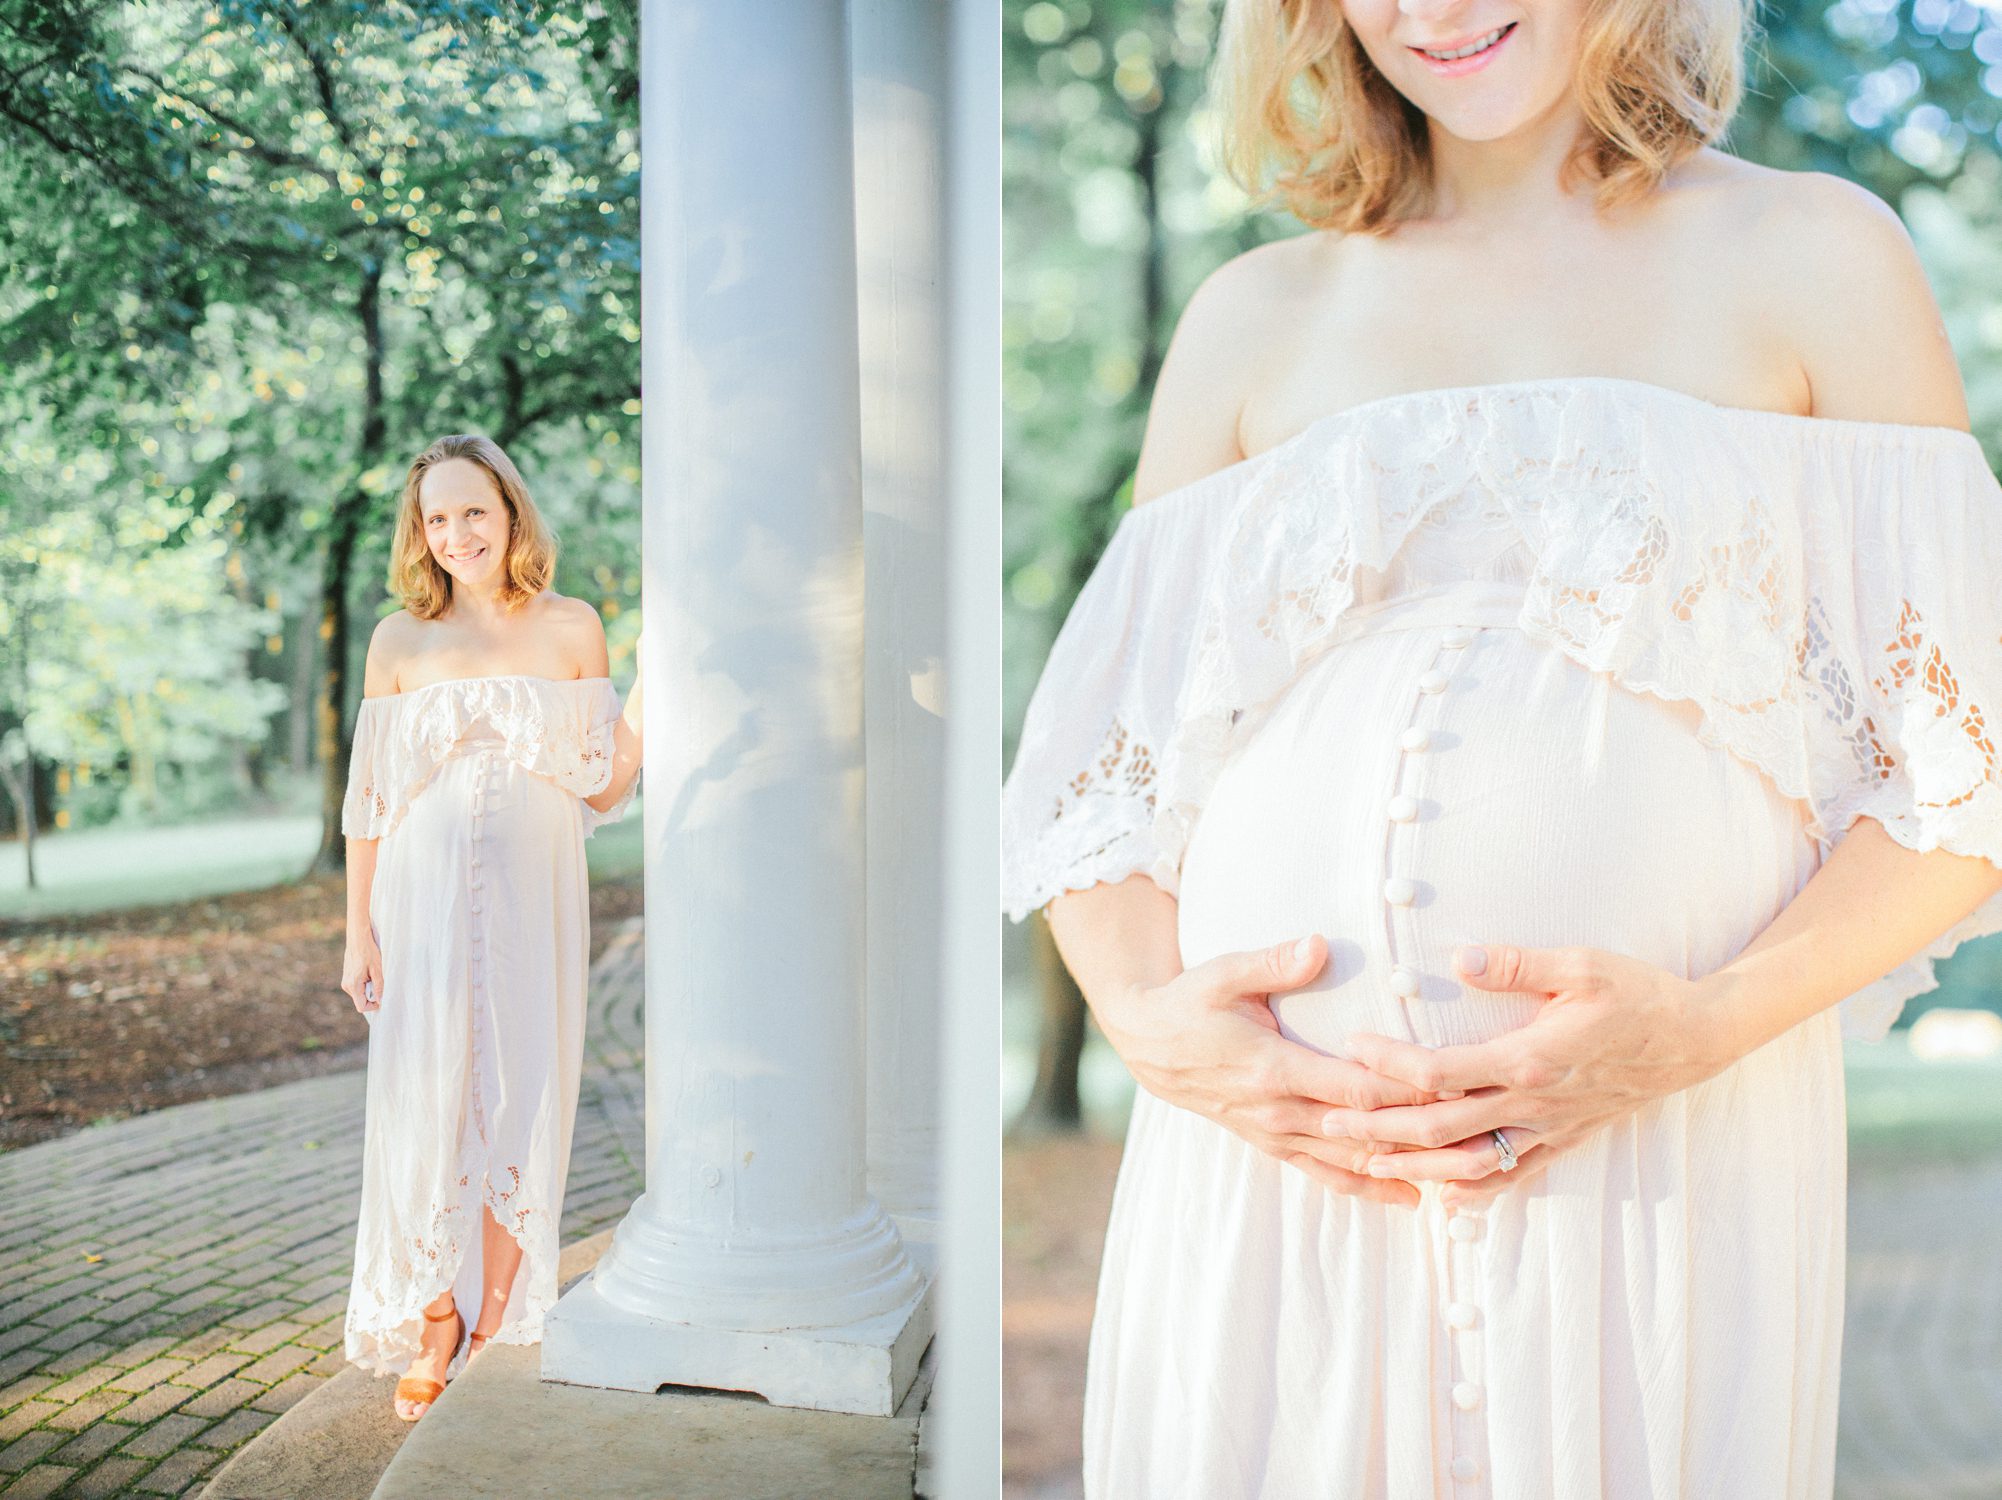 Mom leaning on column and hugging baby bump during maternity session at Woodend Sanctuary in Chevy Chase MD. Photos by LRG Portraits.